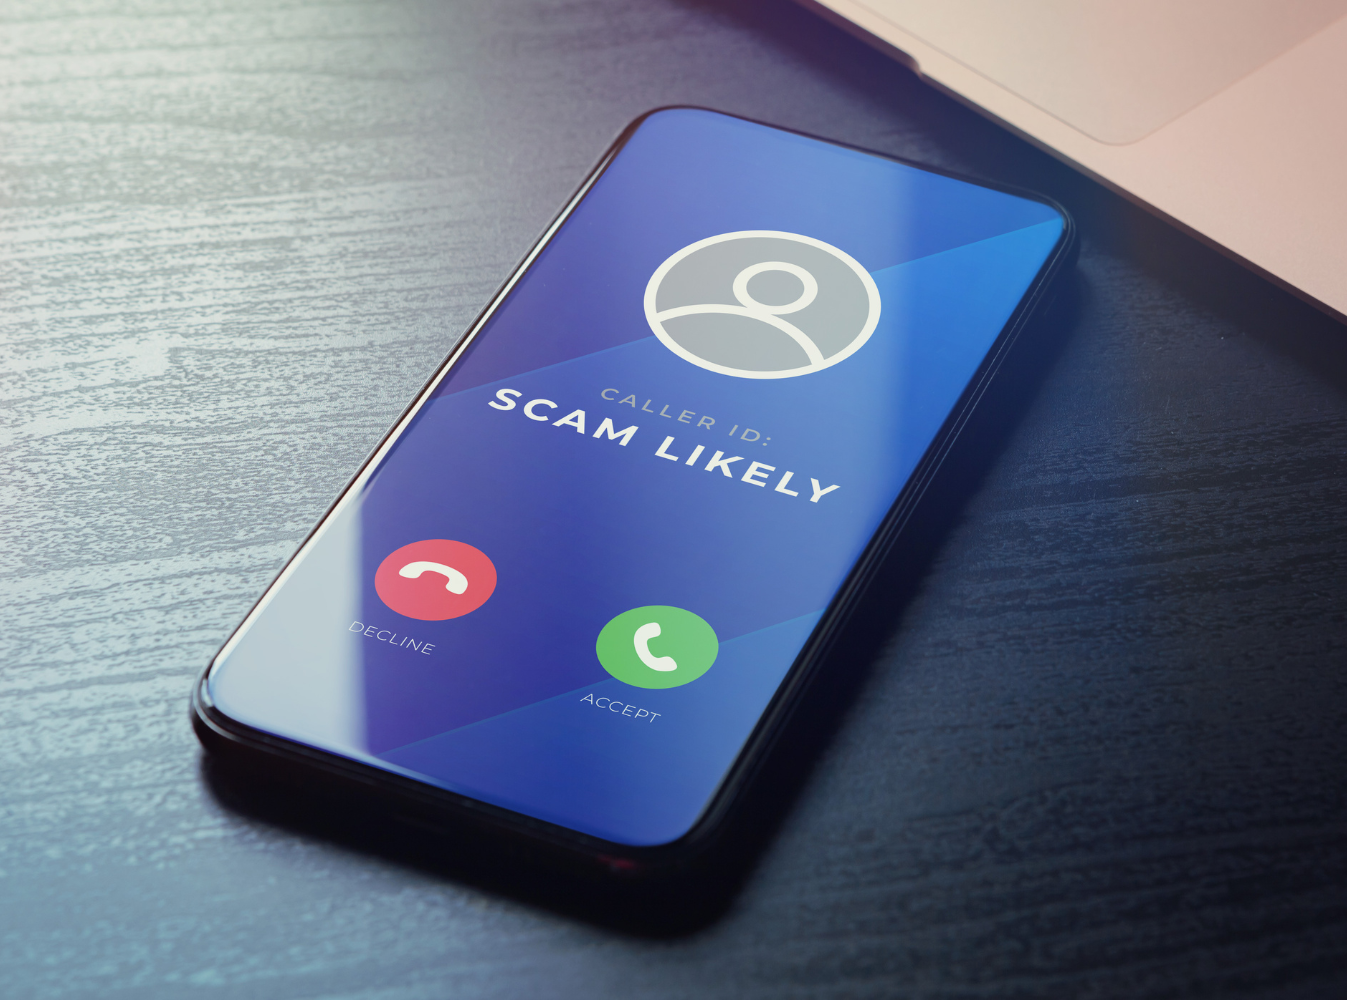 incoming call scam likely